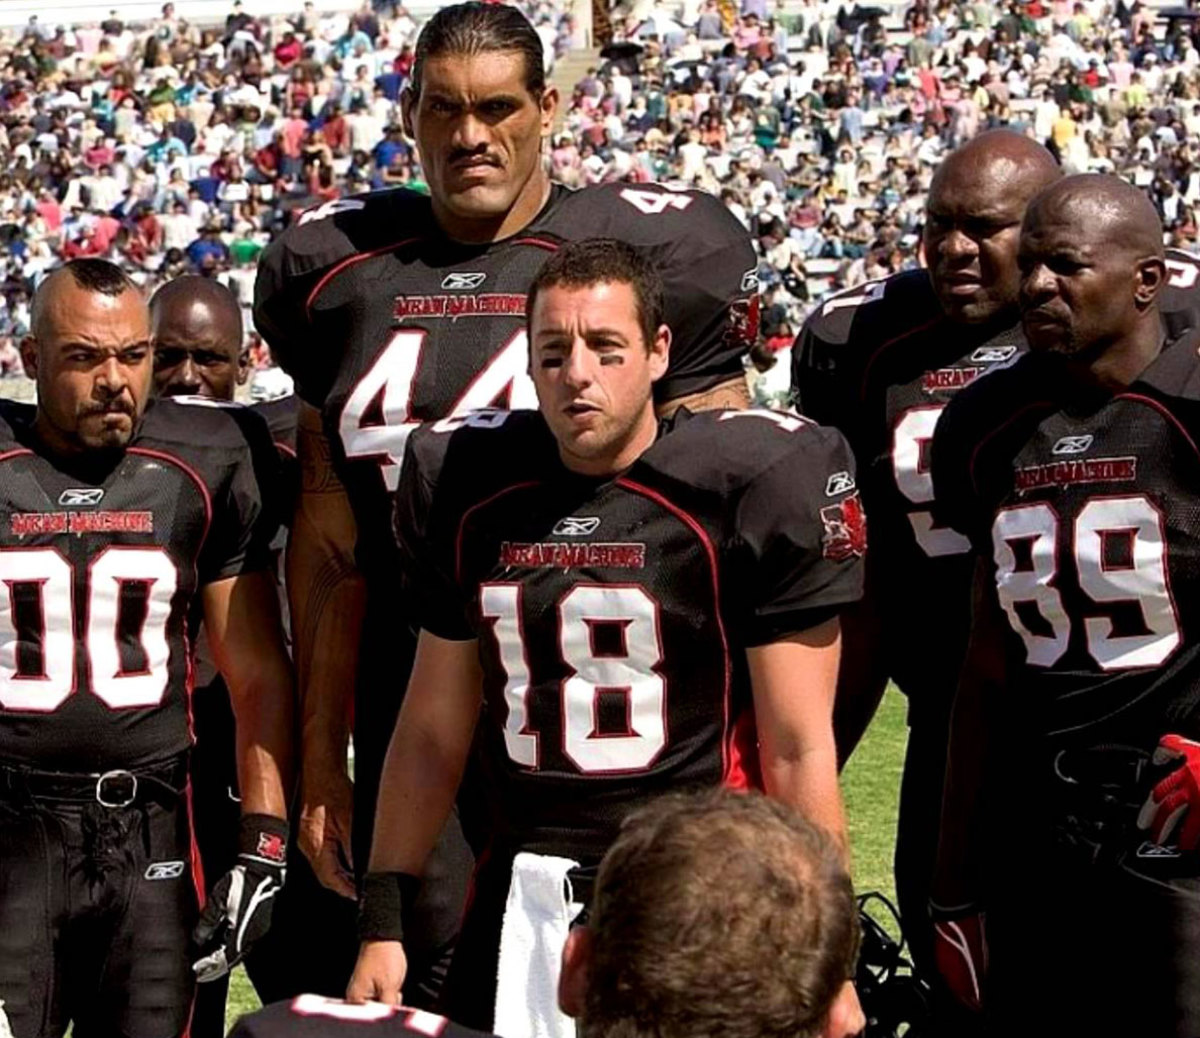 The 12 Greatest Football Movies of All Time